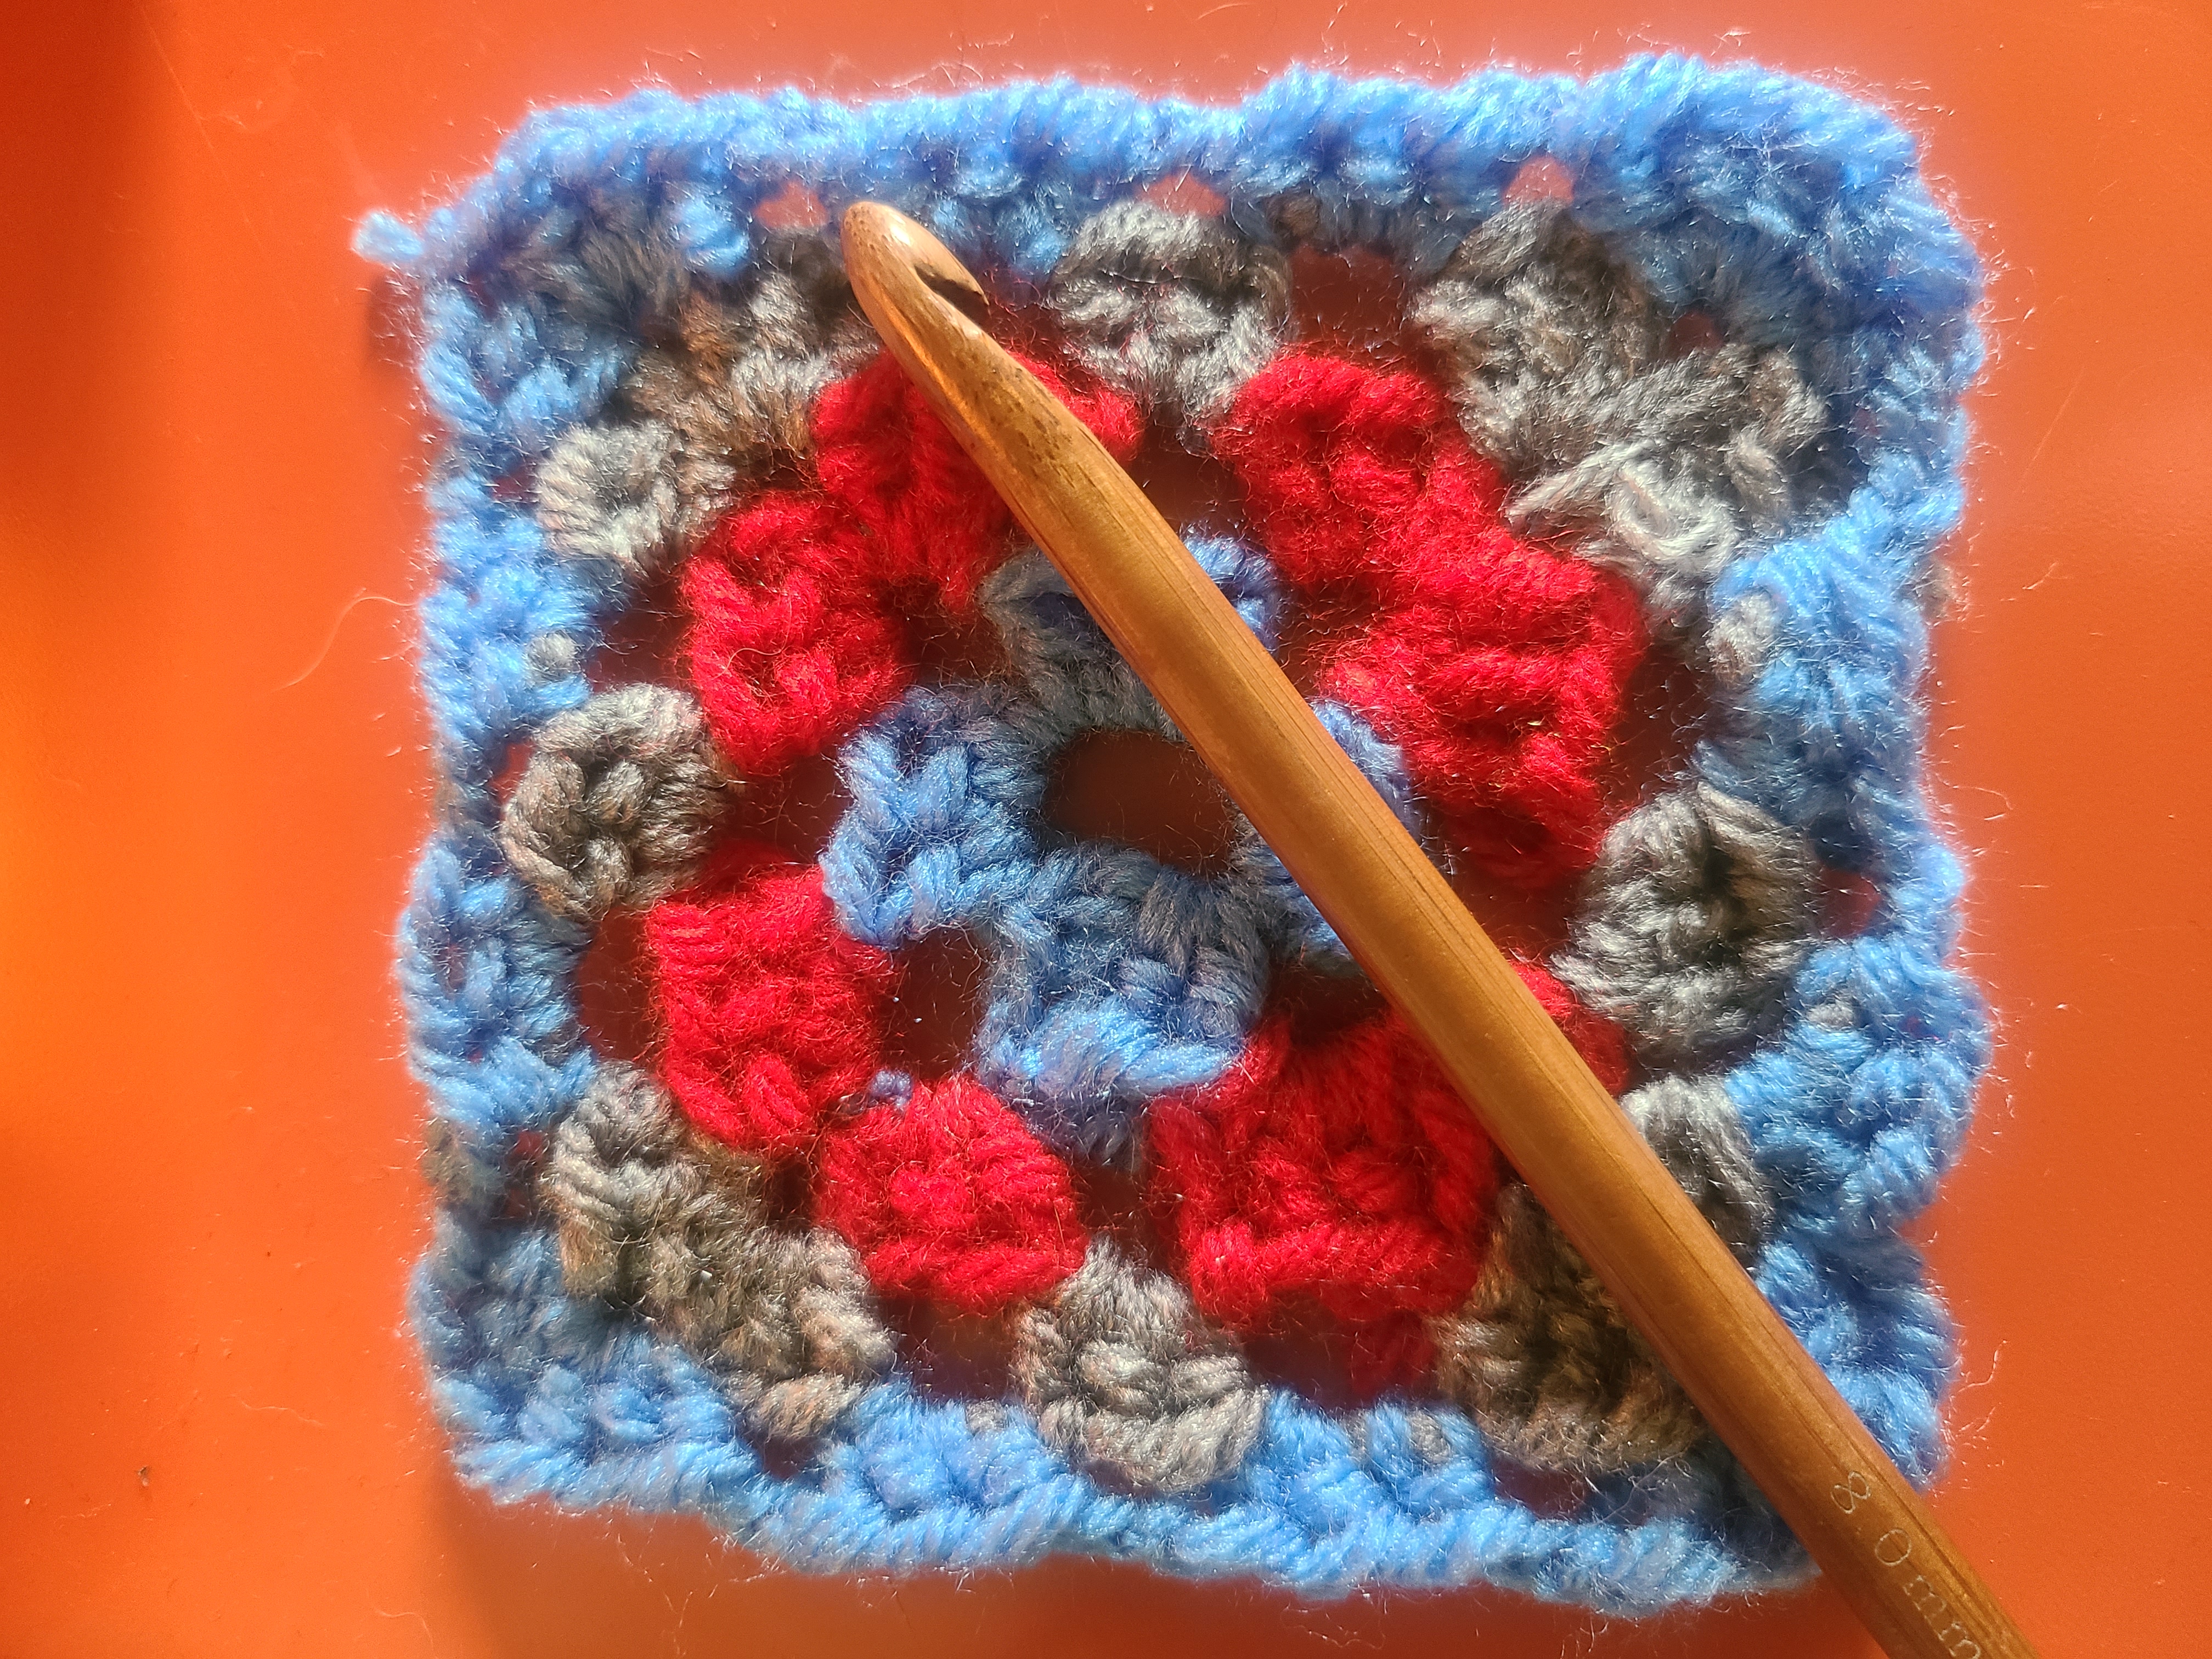 Crocheted granny square and crochet hook